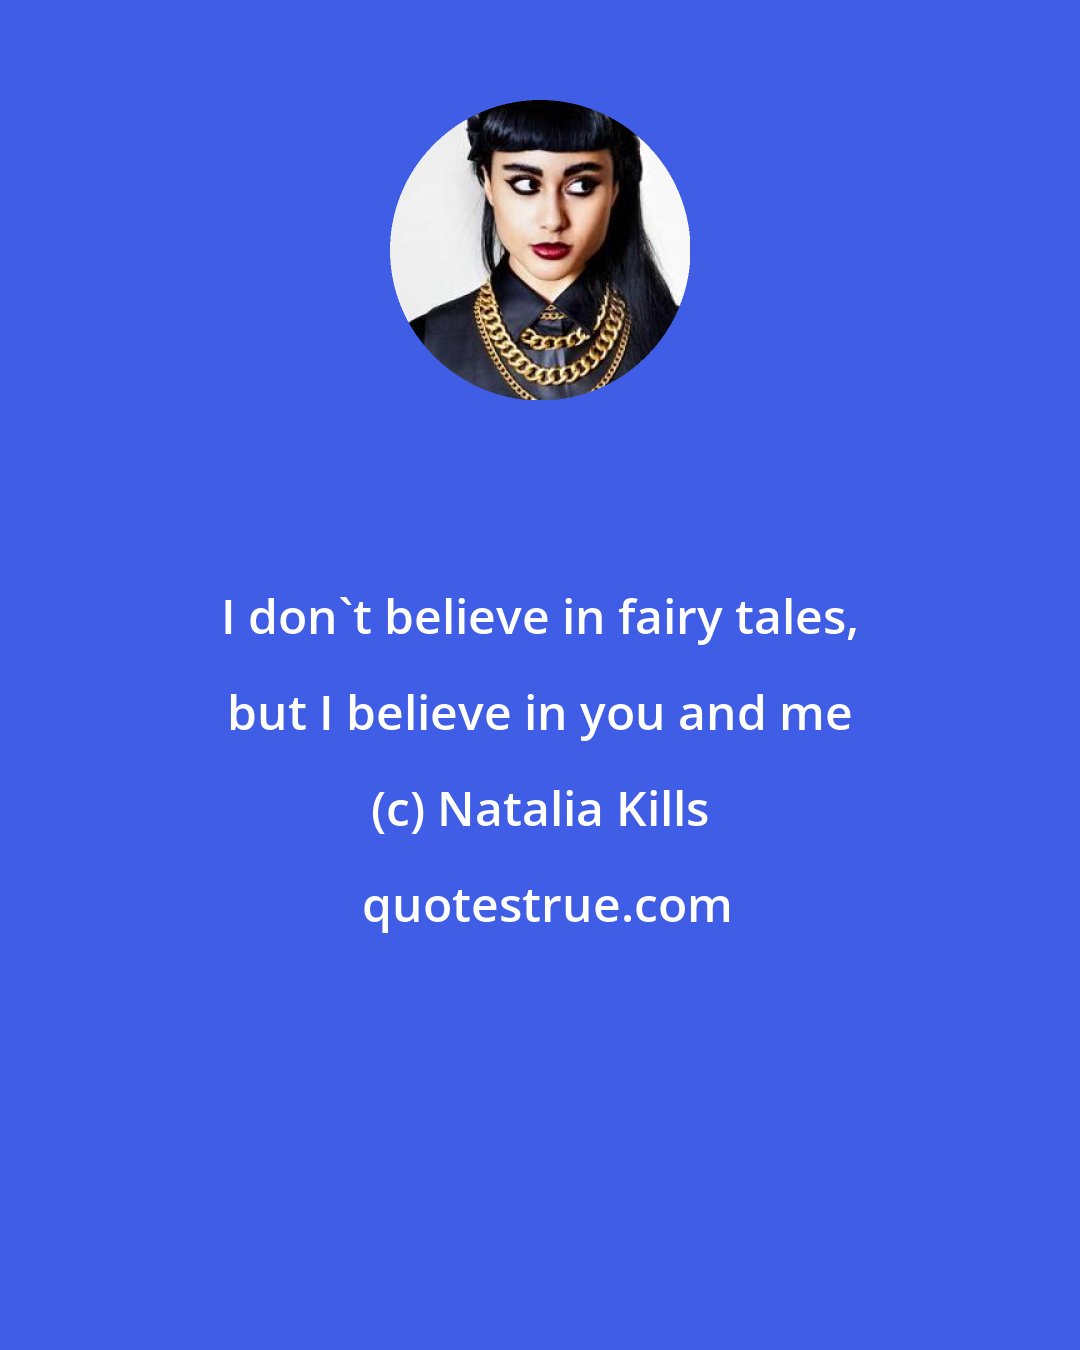 Natalia Kills: I don't believe in fairy tales, but I believe in you and me